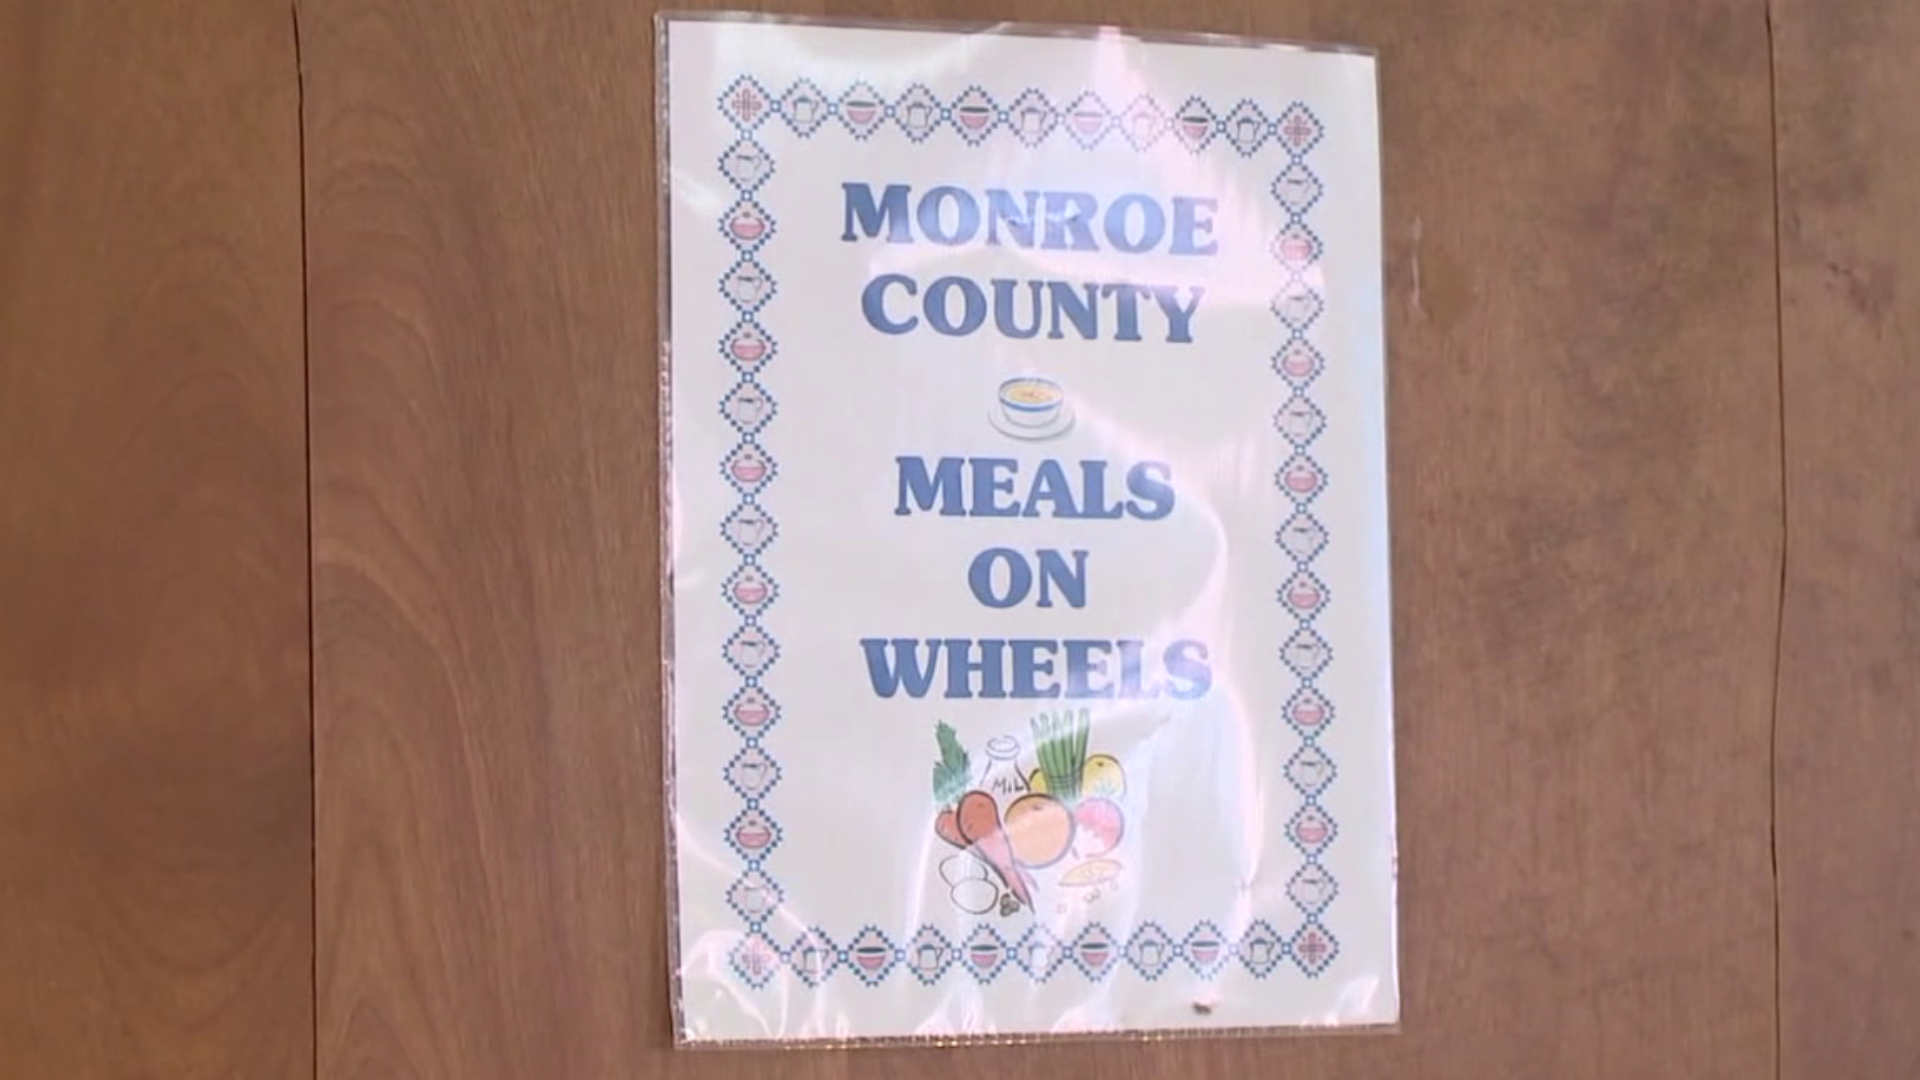 Monroe County Meals on Wheels hopes to raise enough money to provide thousands of meals to clients impacted by COVID-19.